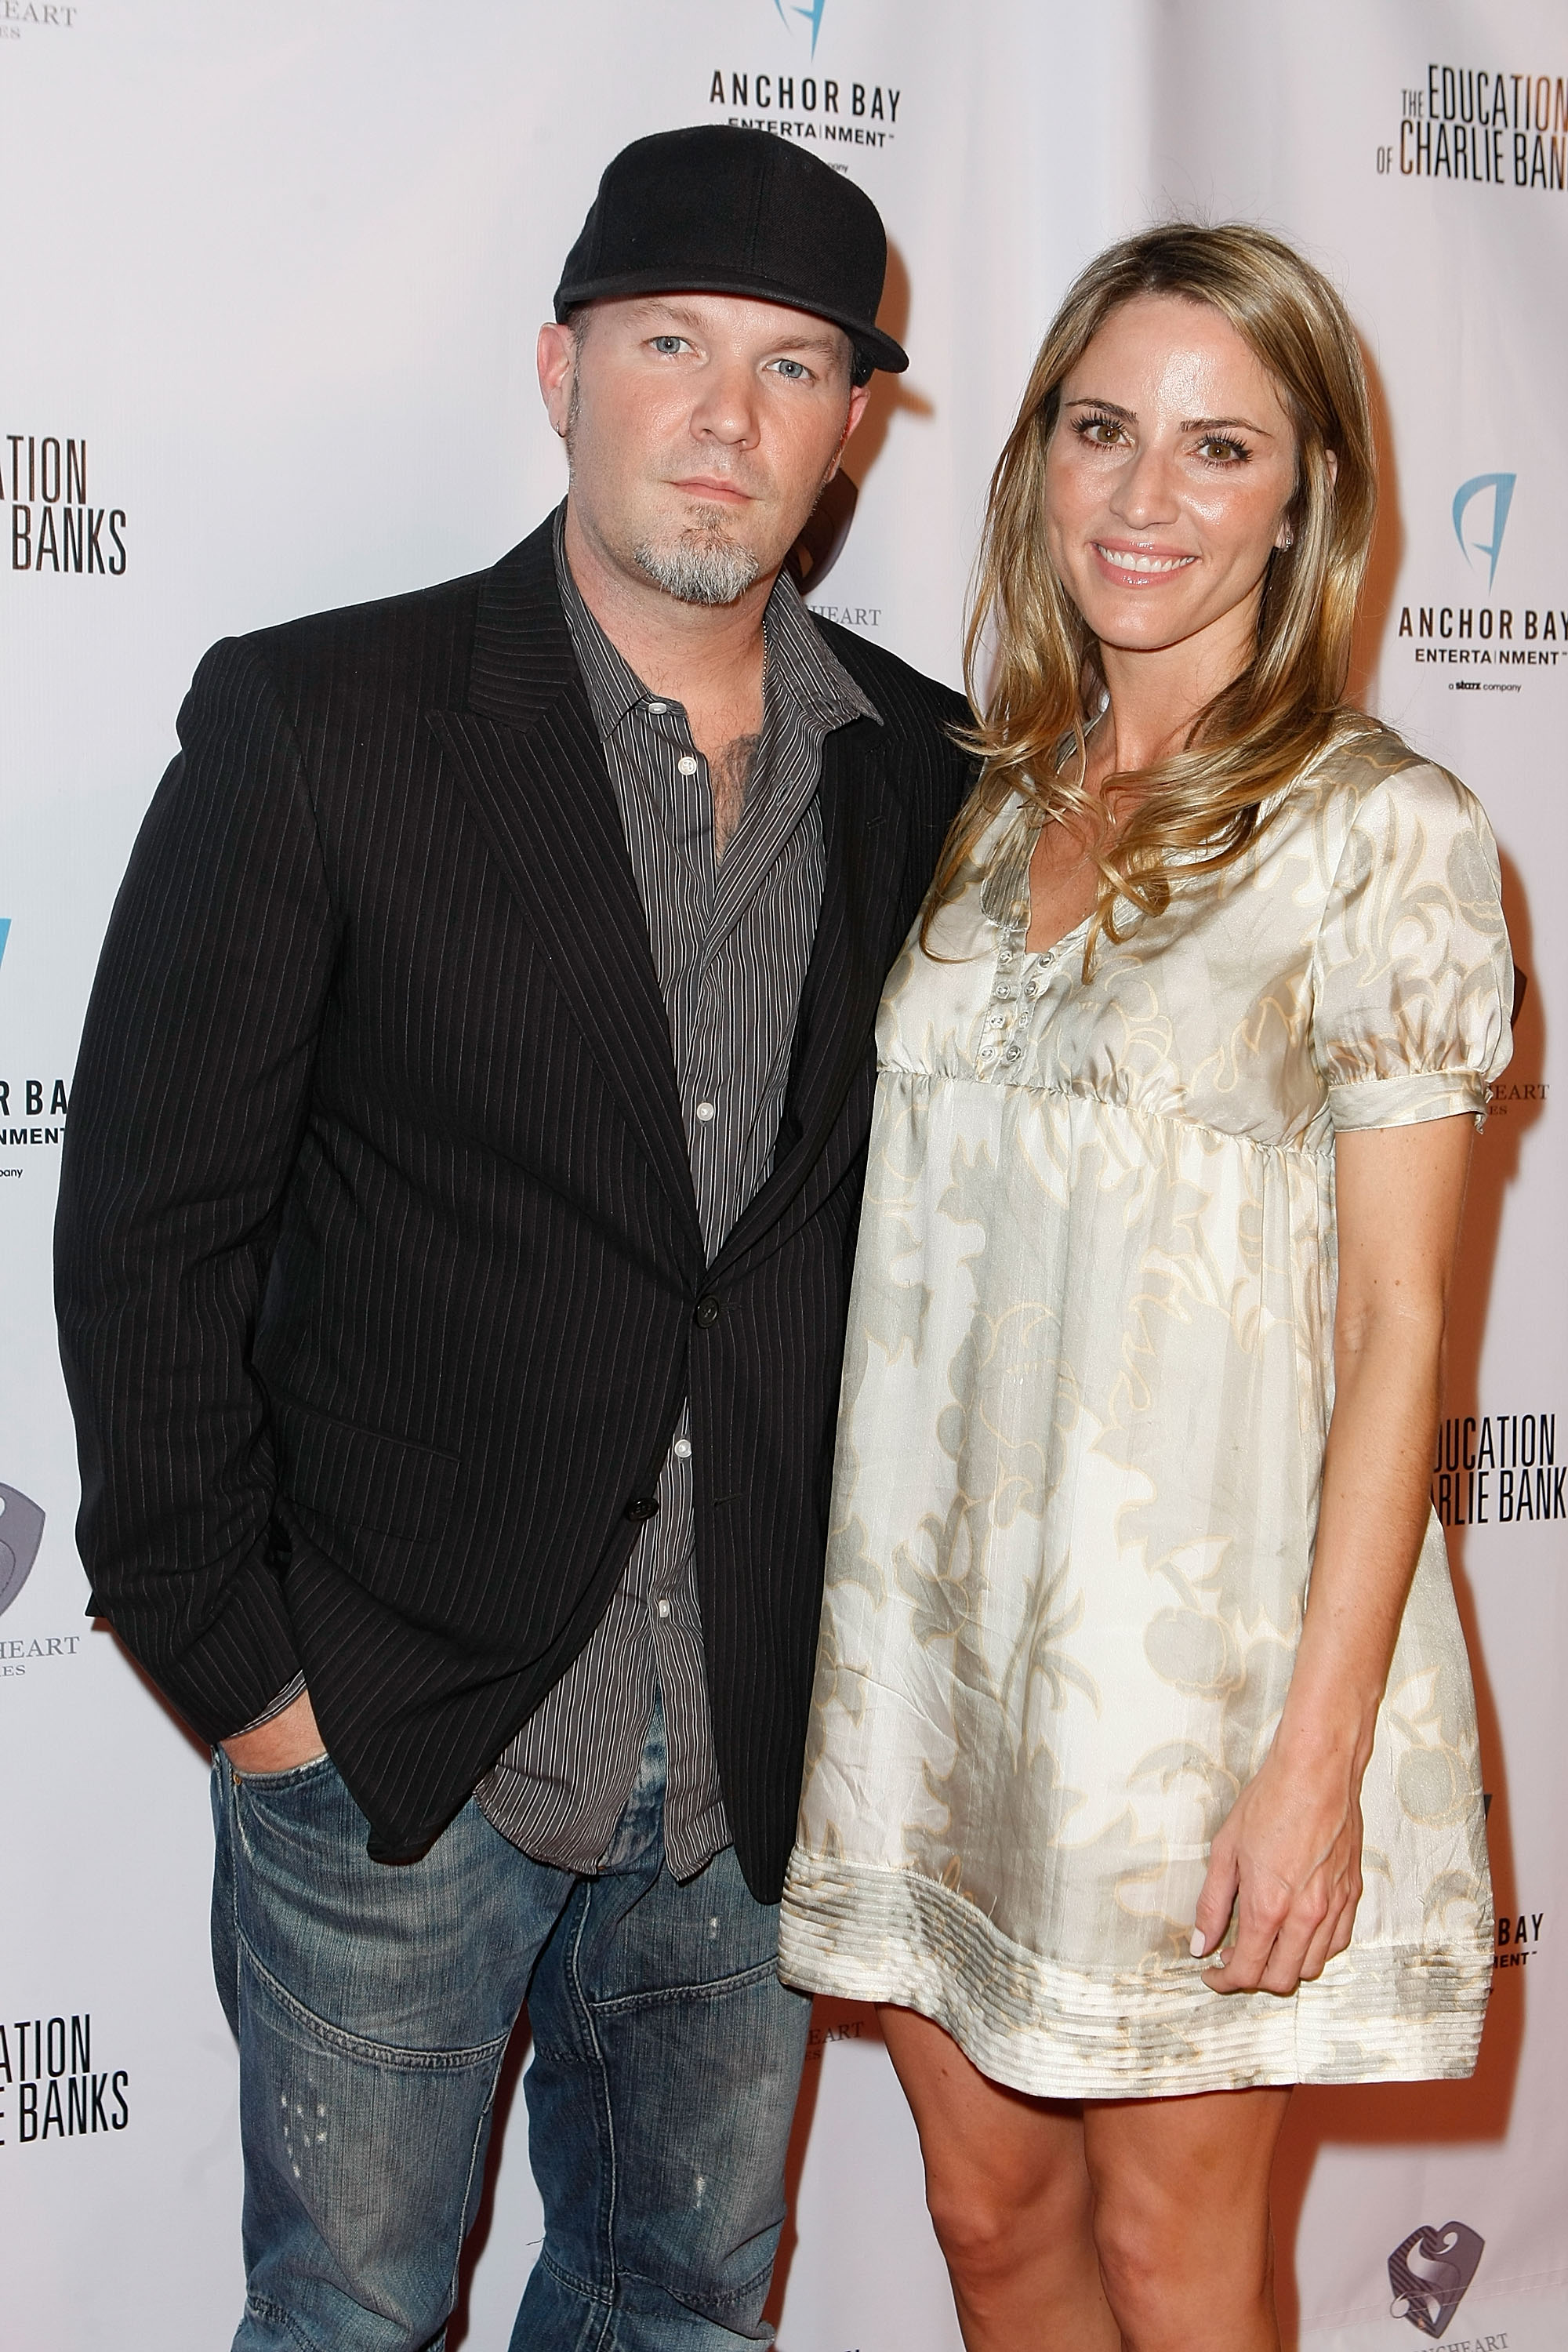 Fred Durst and Esther Nazarov at the screening of "The Education of Charlie Banks" on March 18, 2009, in Los Angeles, California. | Source: Getty Images